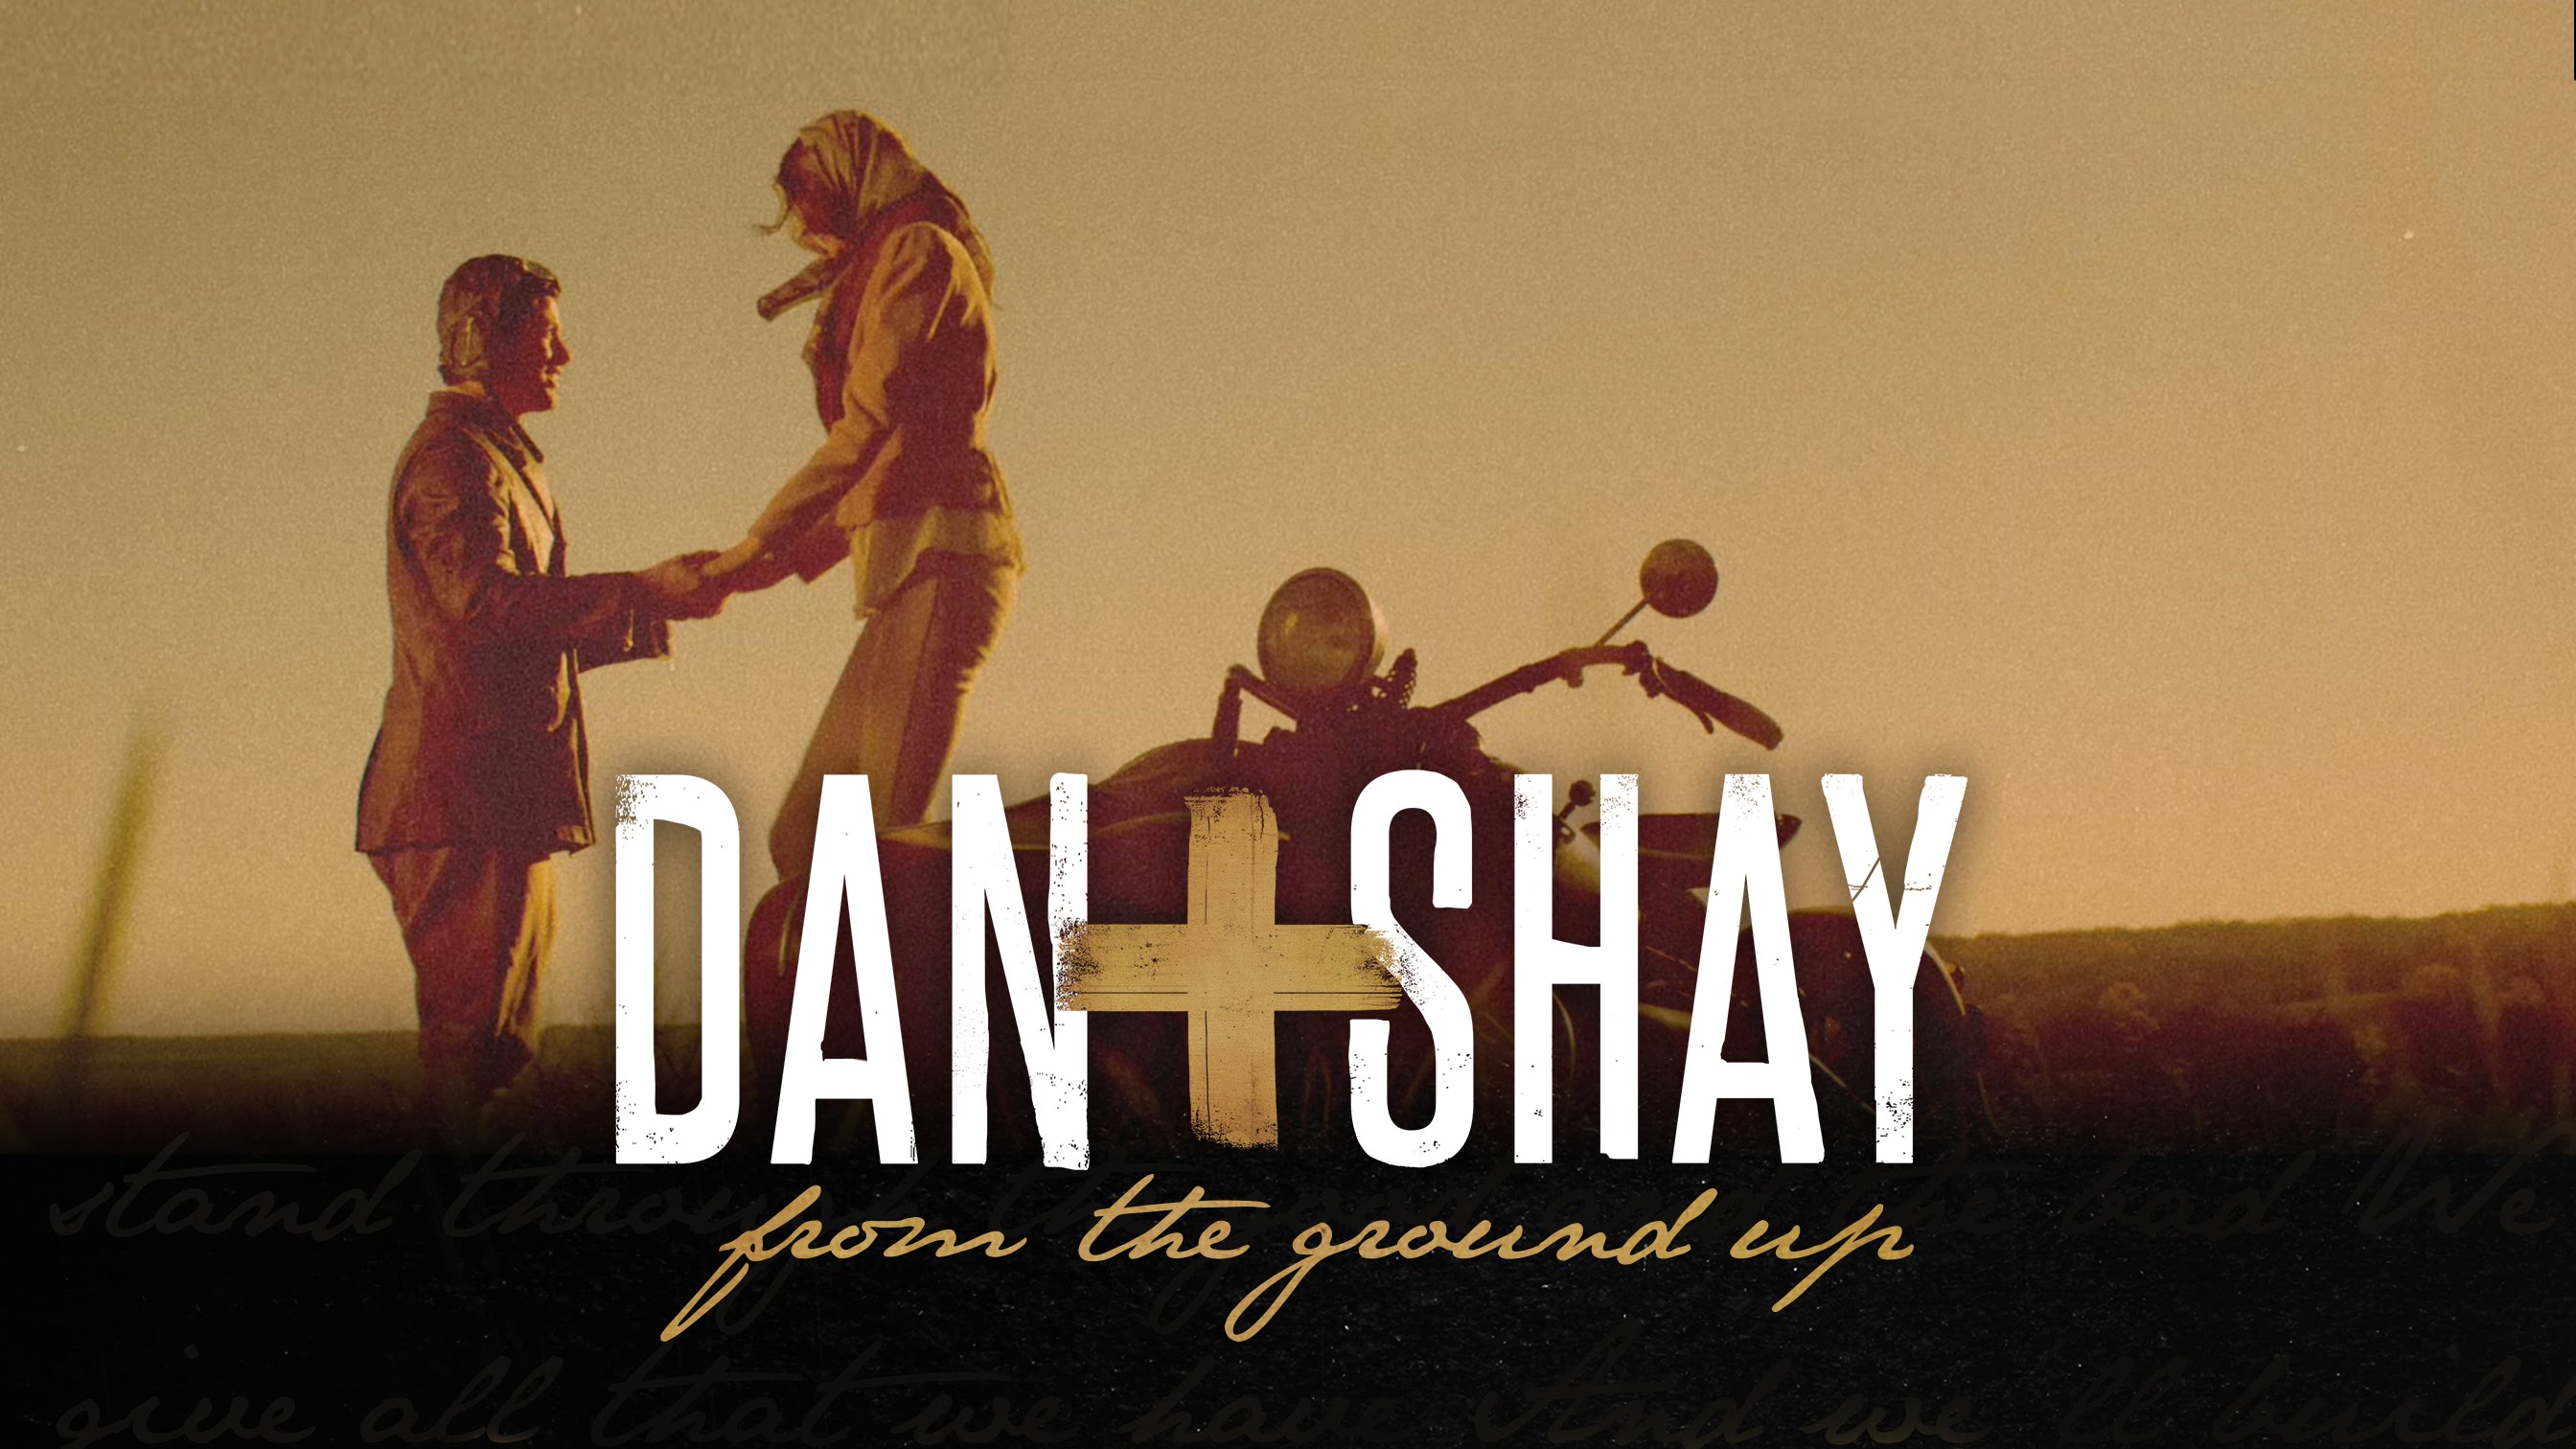 Dan + Shay - From The Ground Up